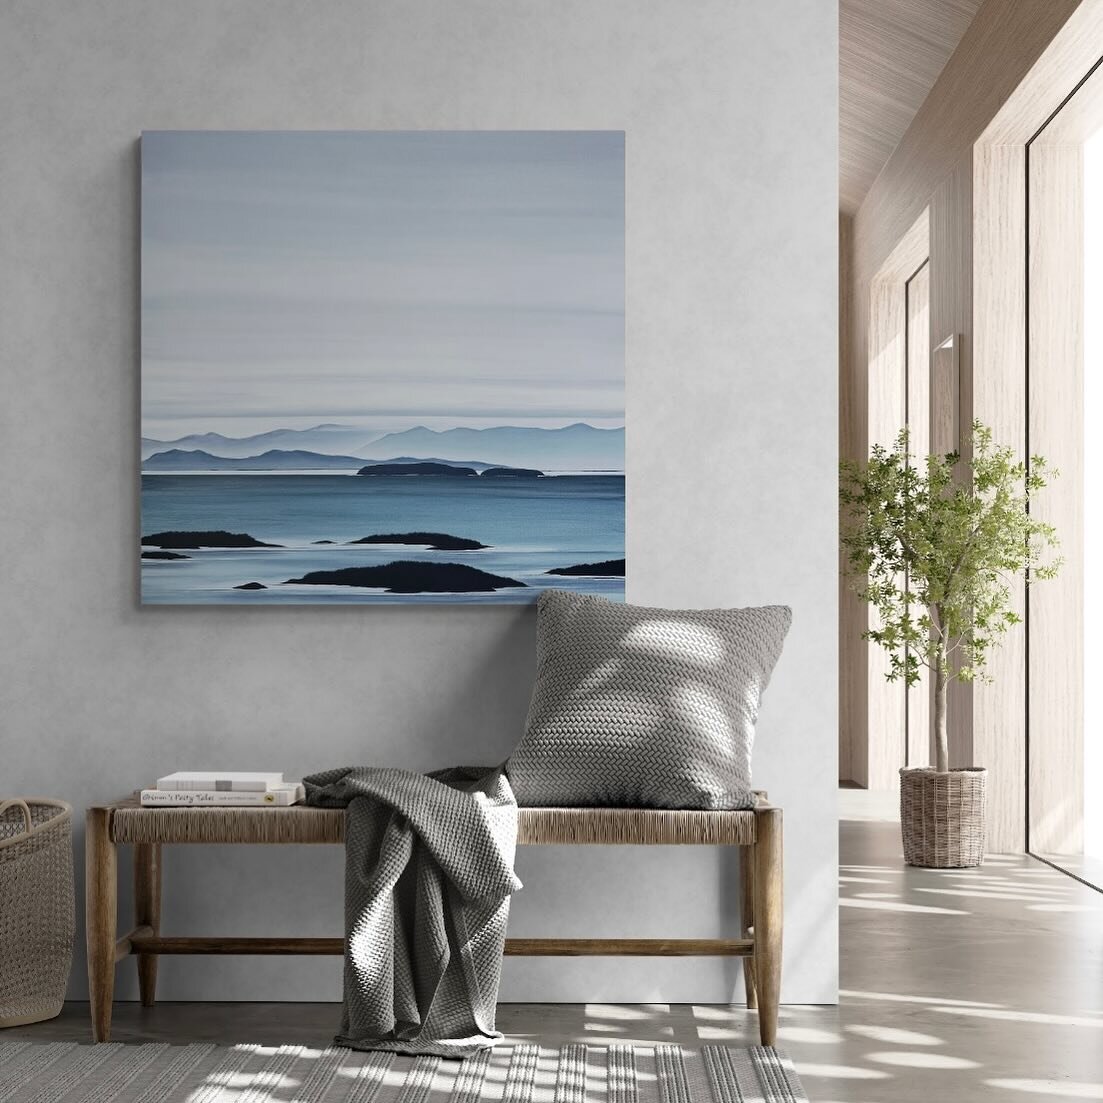 WINCHELSEA I
36 x 36 
Acrylic on stretched mounted canvas.

Inspired by the Winchelsea islands here on Vancouver Island. 

For inquiries on this new painting, and a few others, please visit @matticksgallery in Victoria where I just delivered my final